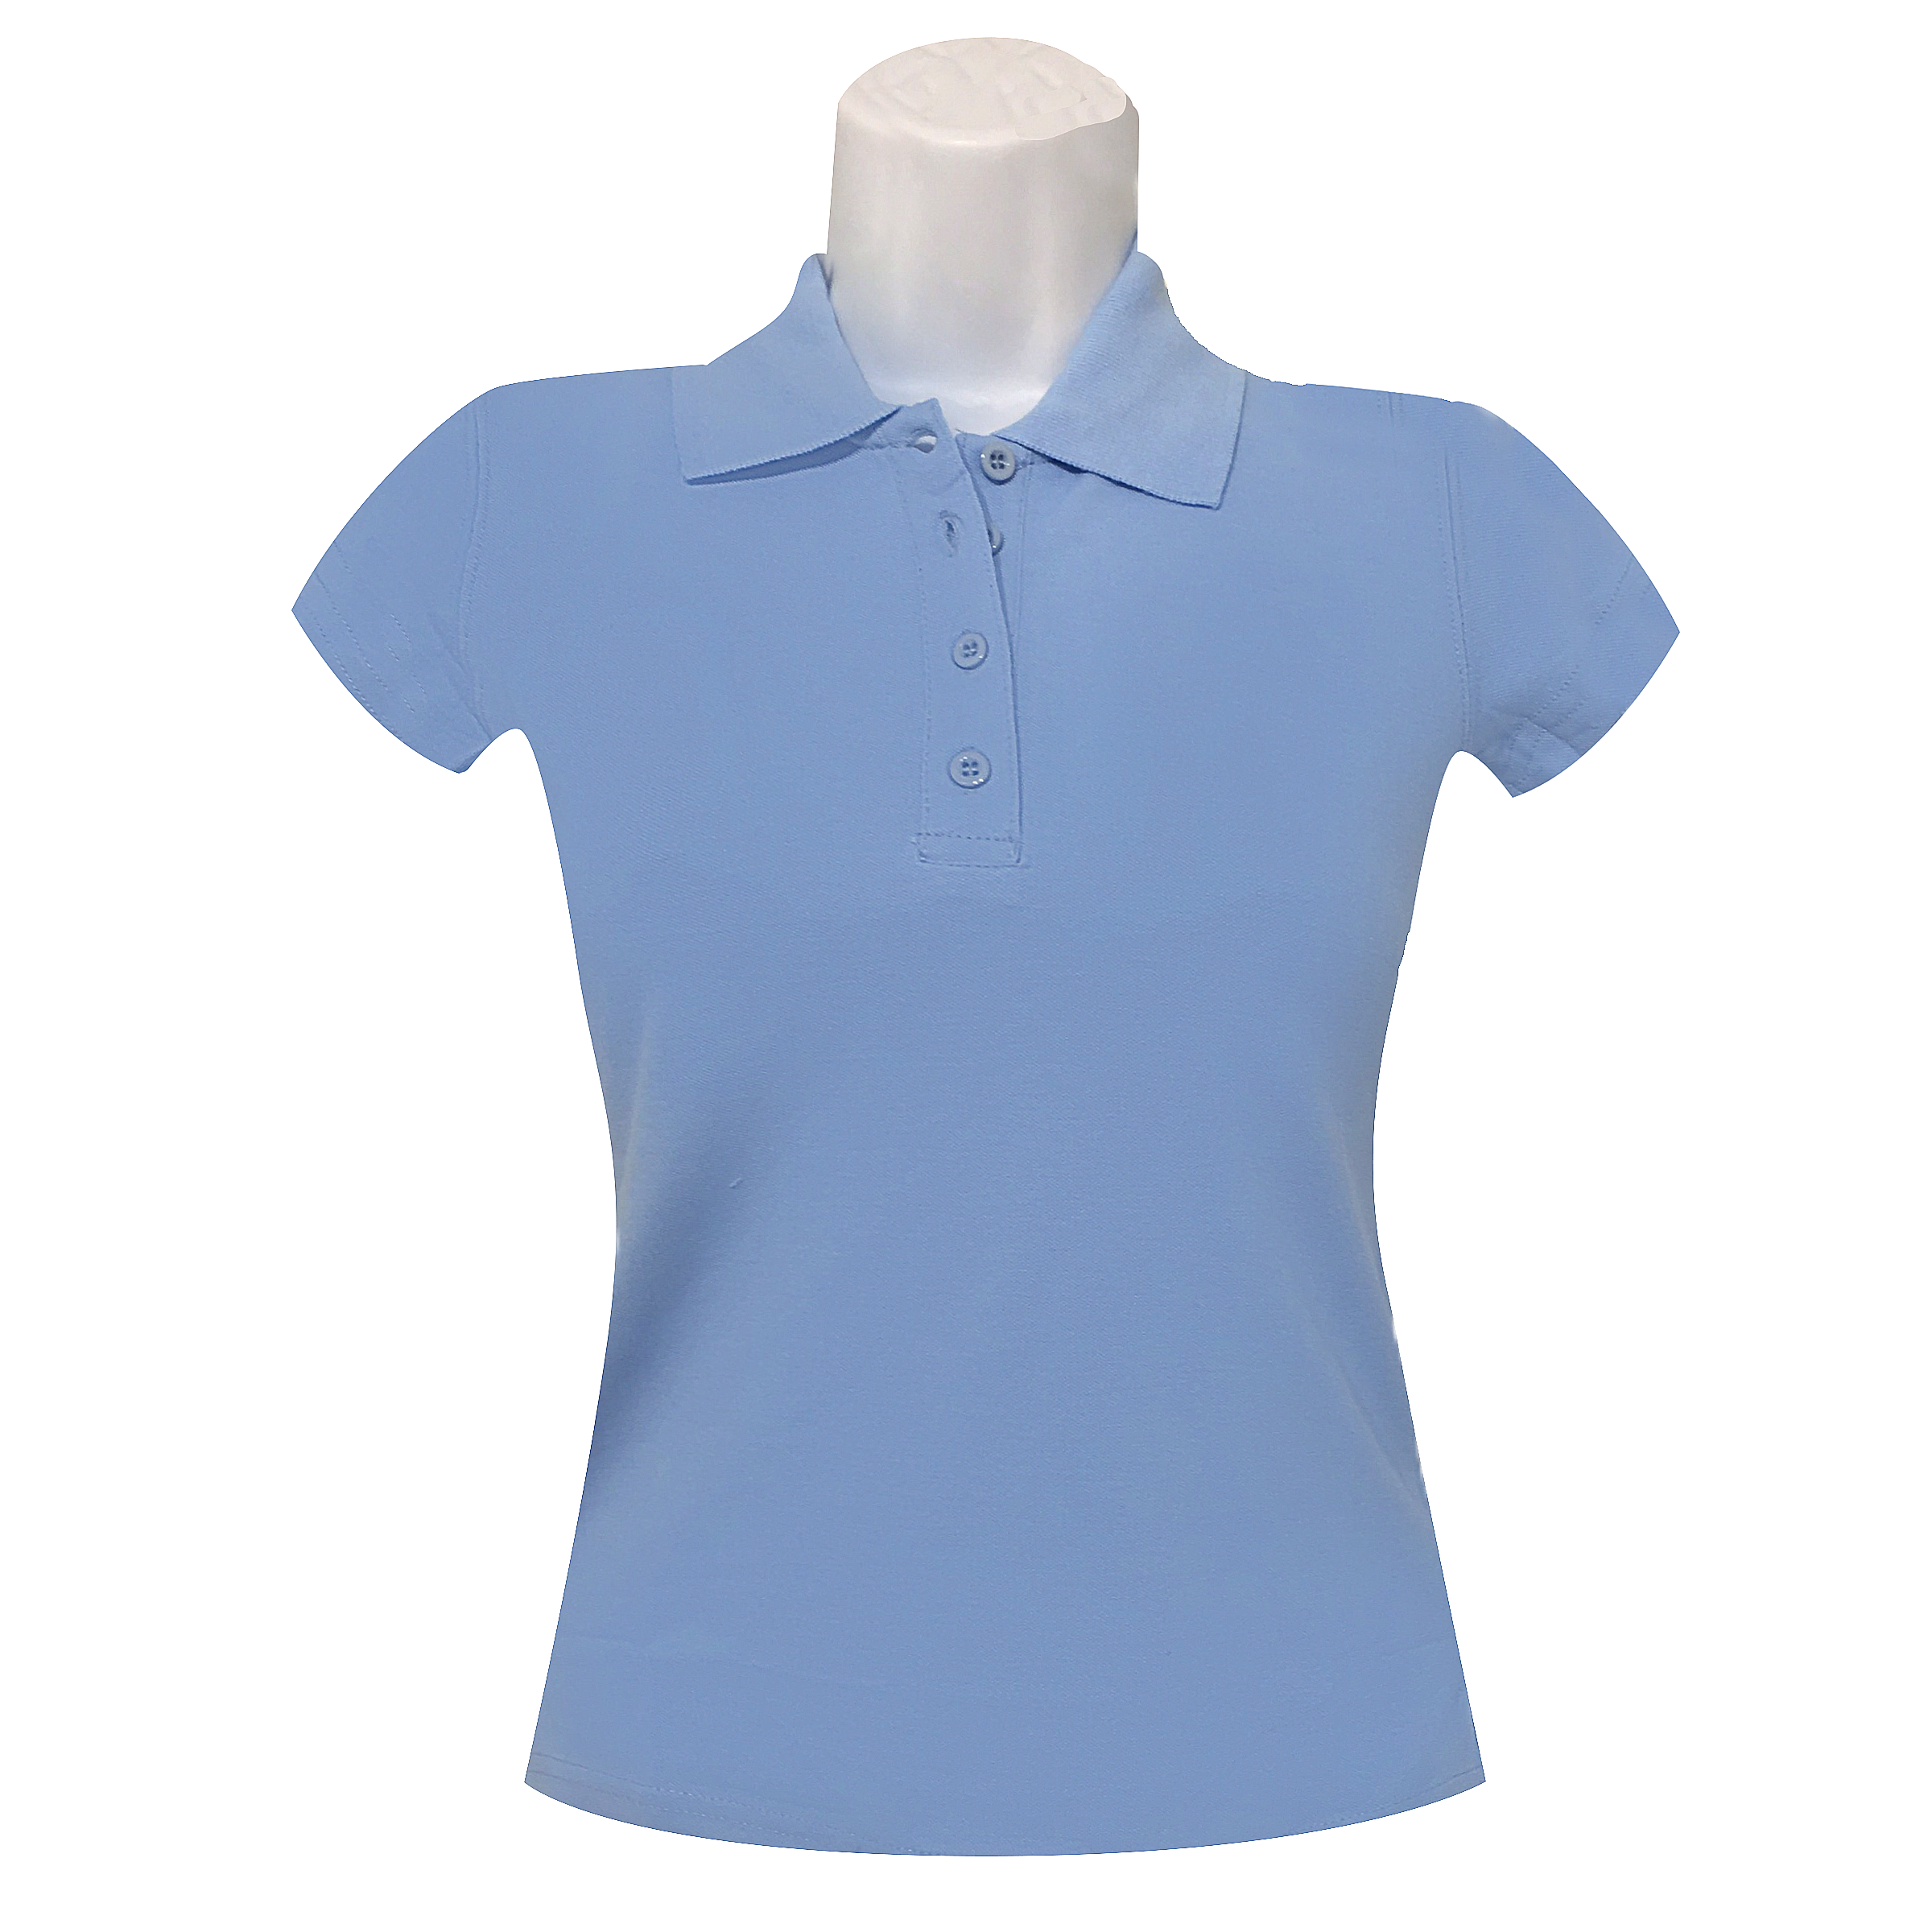 Female Fit Polo S/S - 060226